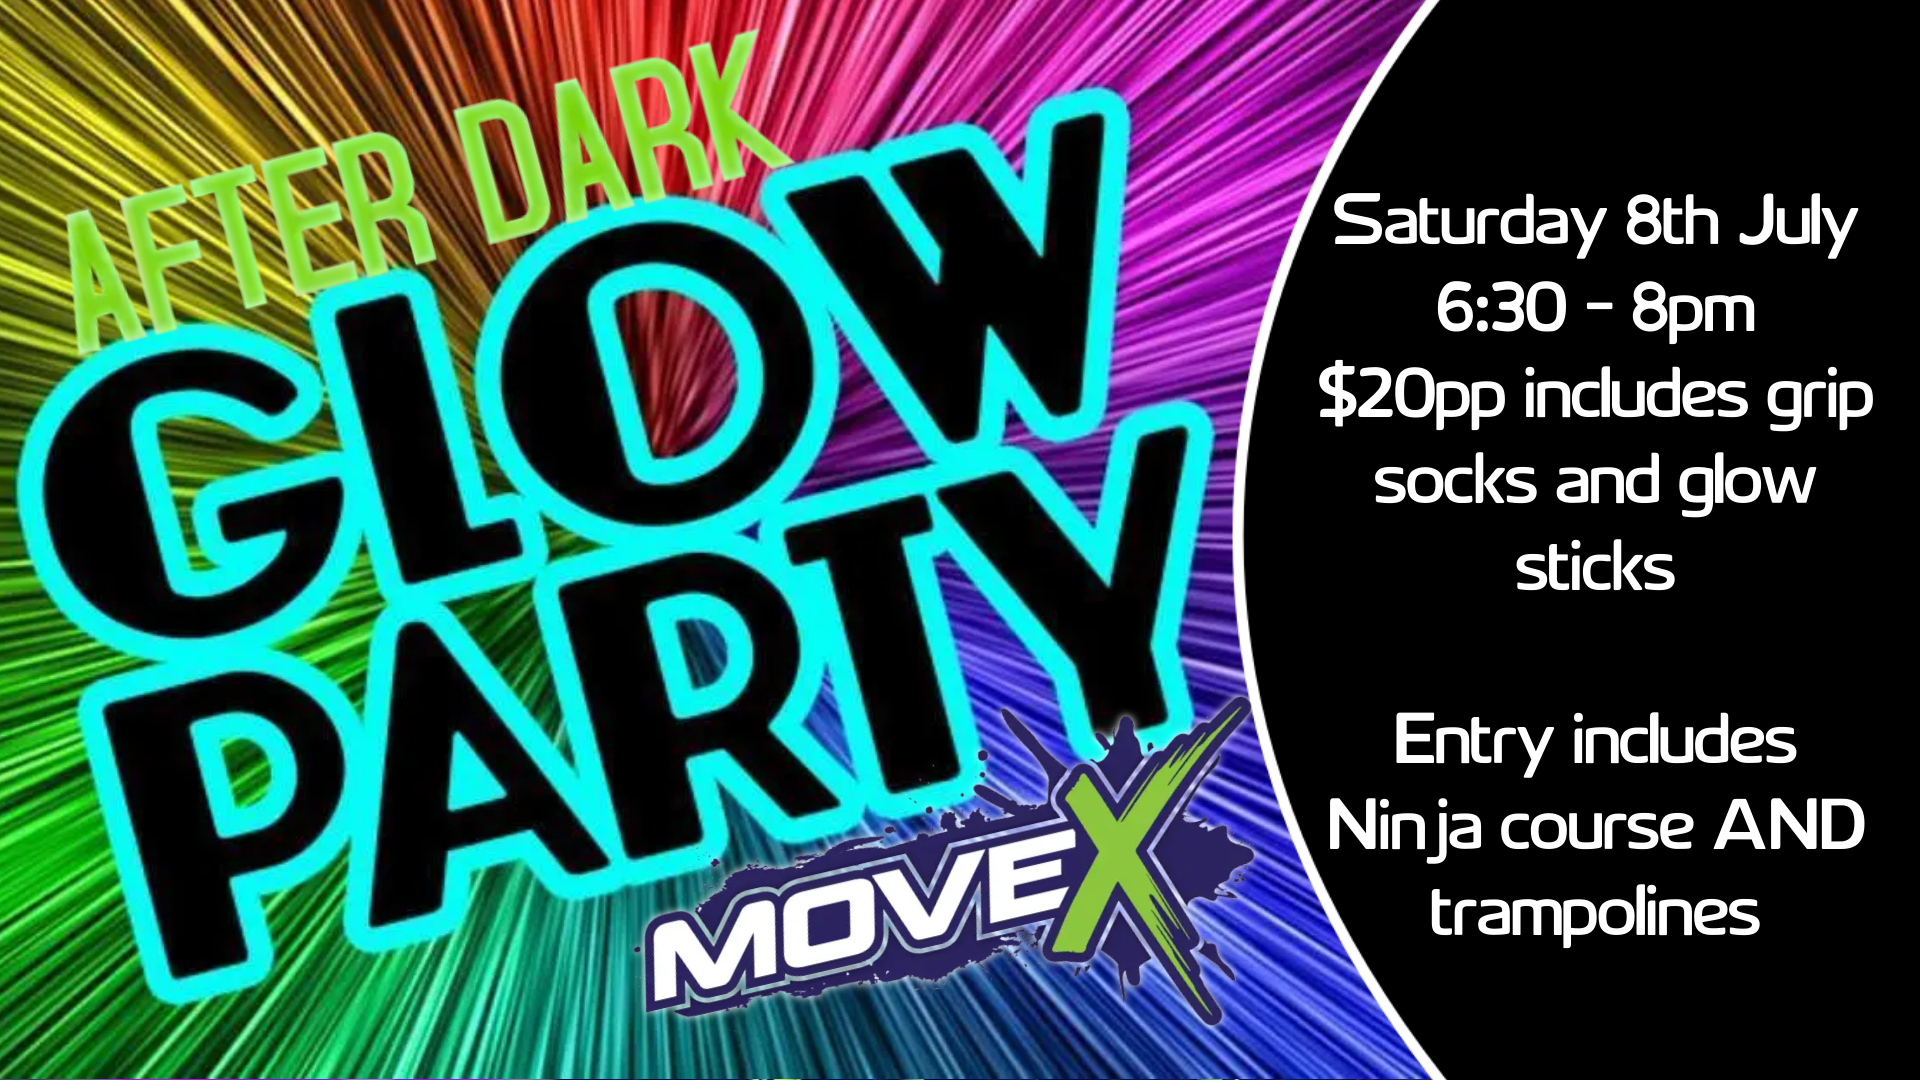 Image of After Dark Glow Party event